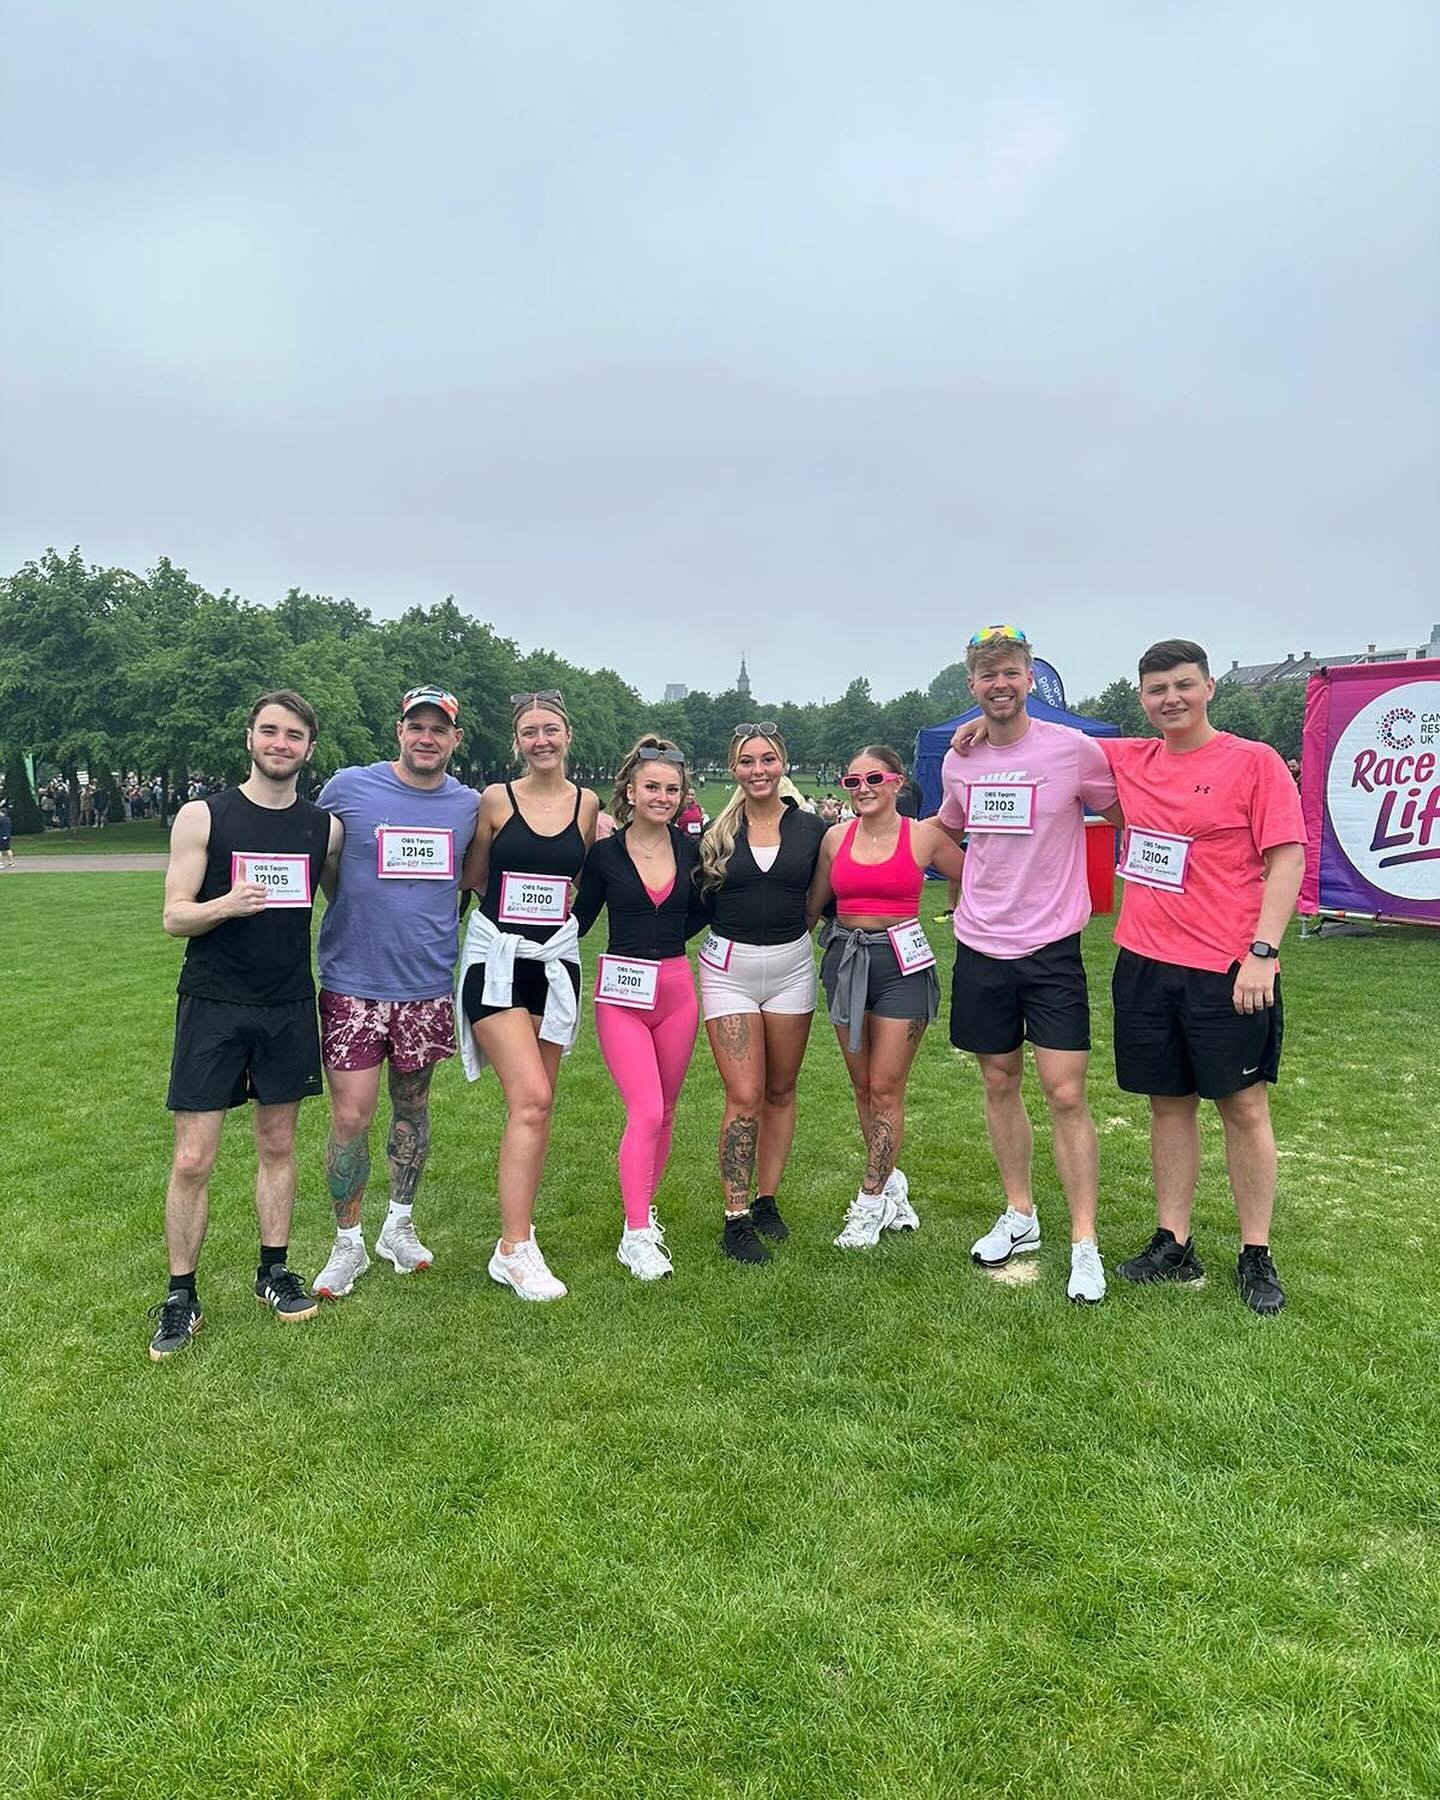 Race for life completed 🎀💕

Some of the One Bruce Team and friends ran the race for life today and smashed it, we are so proud of you guys 🙌🏻

They have currently raised &pound;2280 for cancer research, a cause so close to all our hearts at Bruce